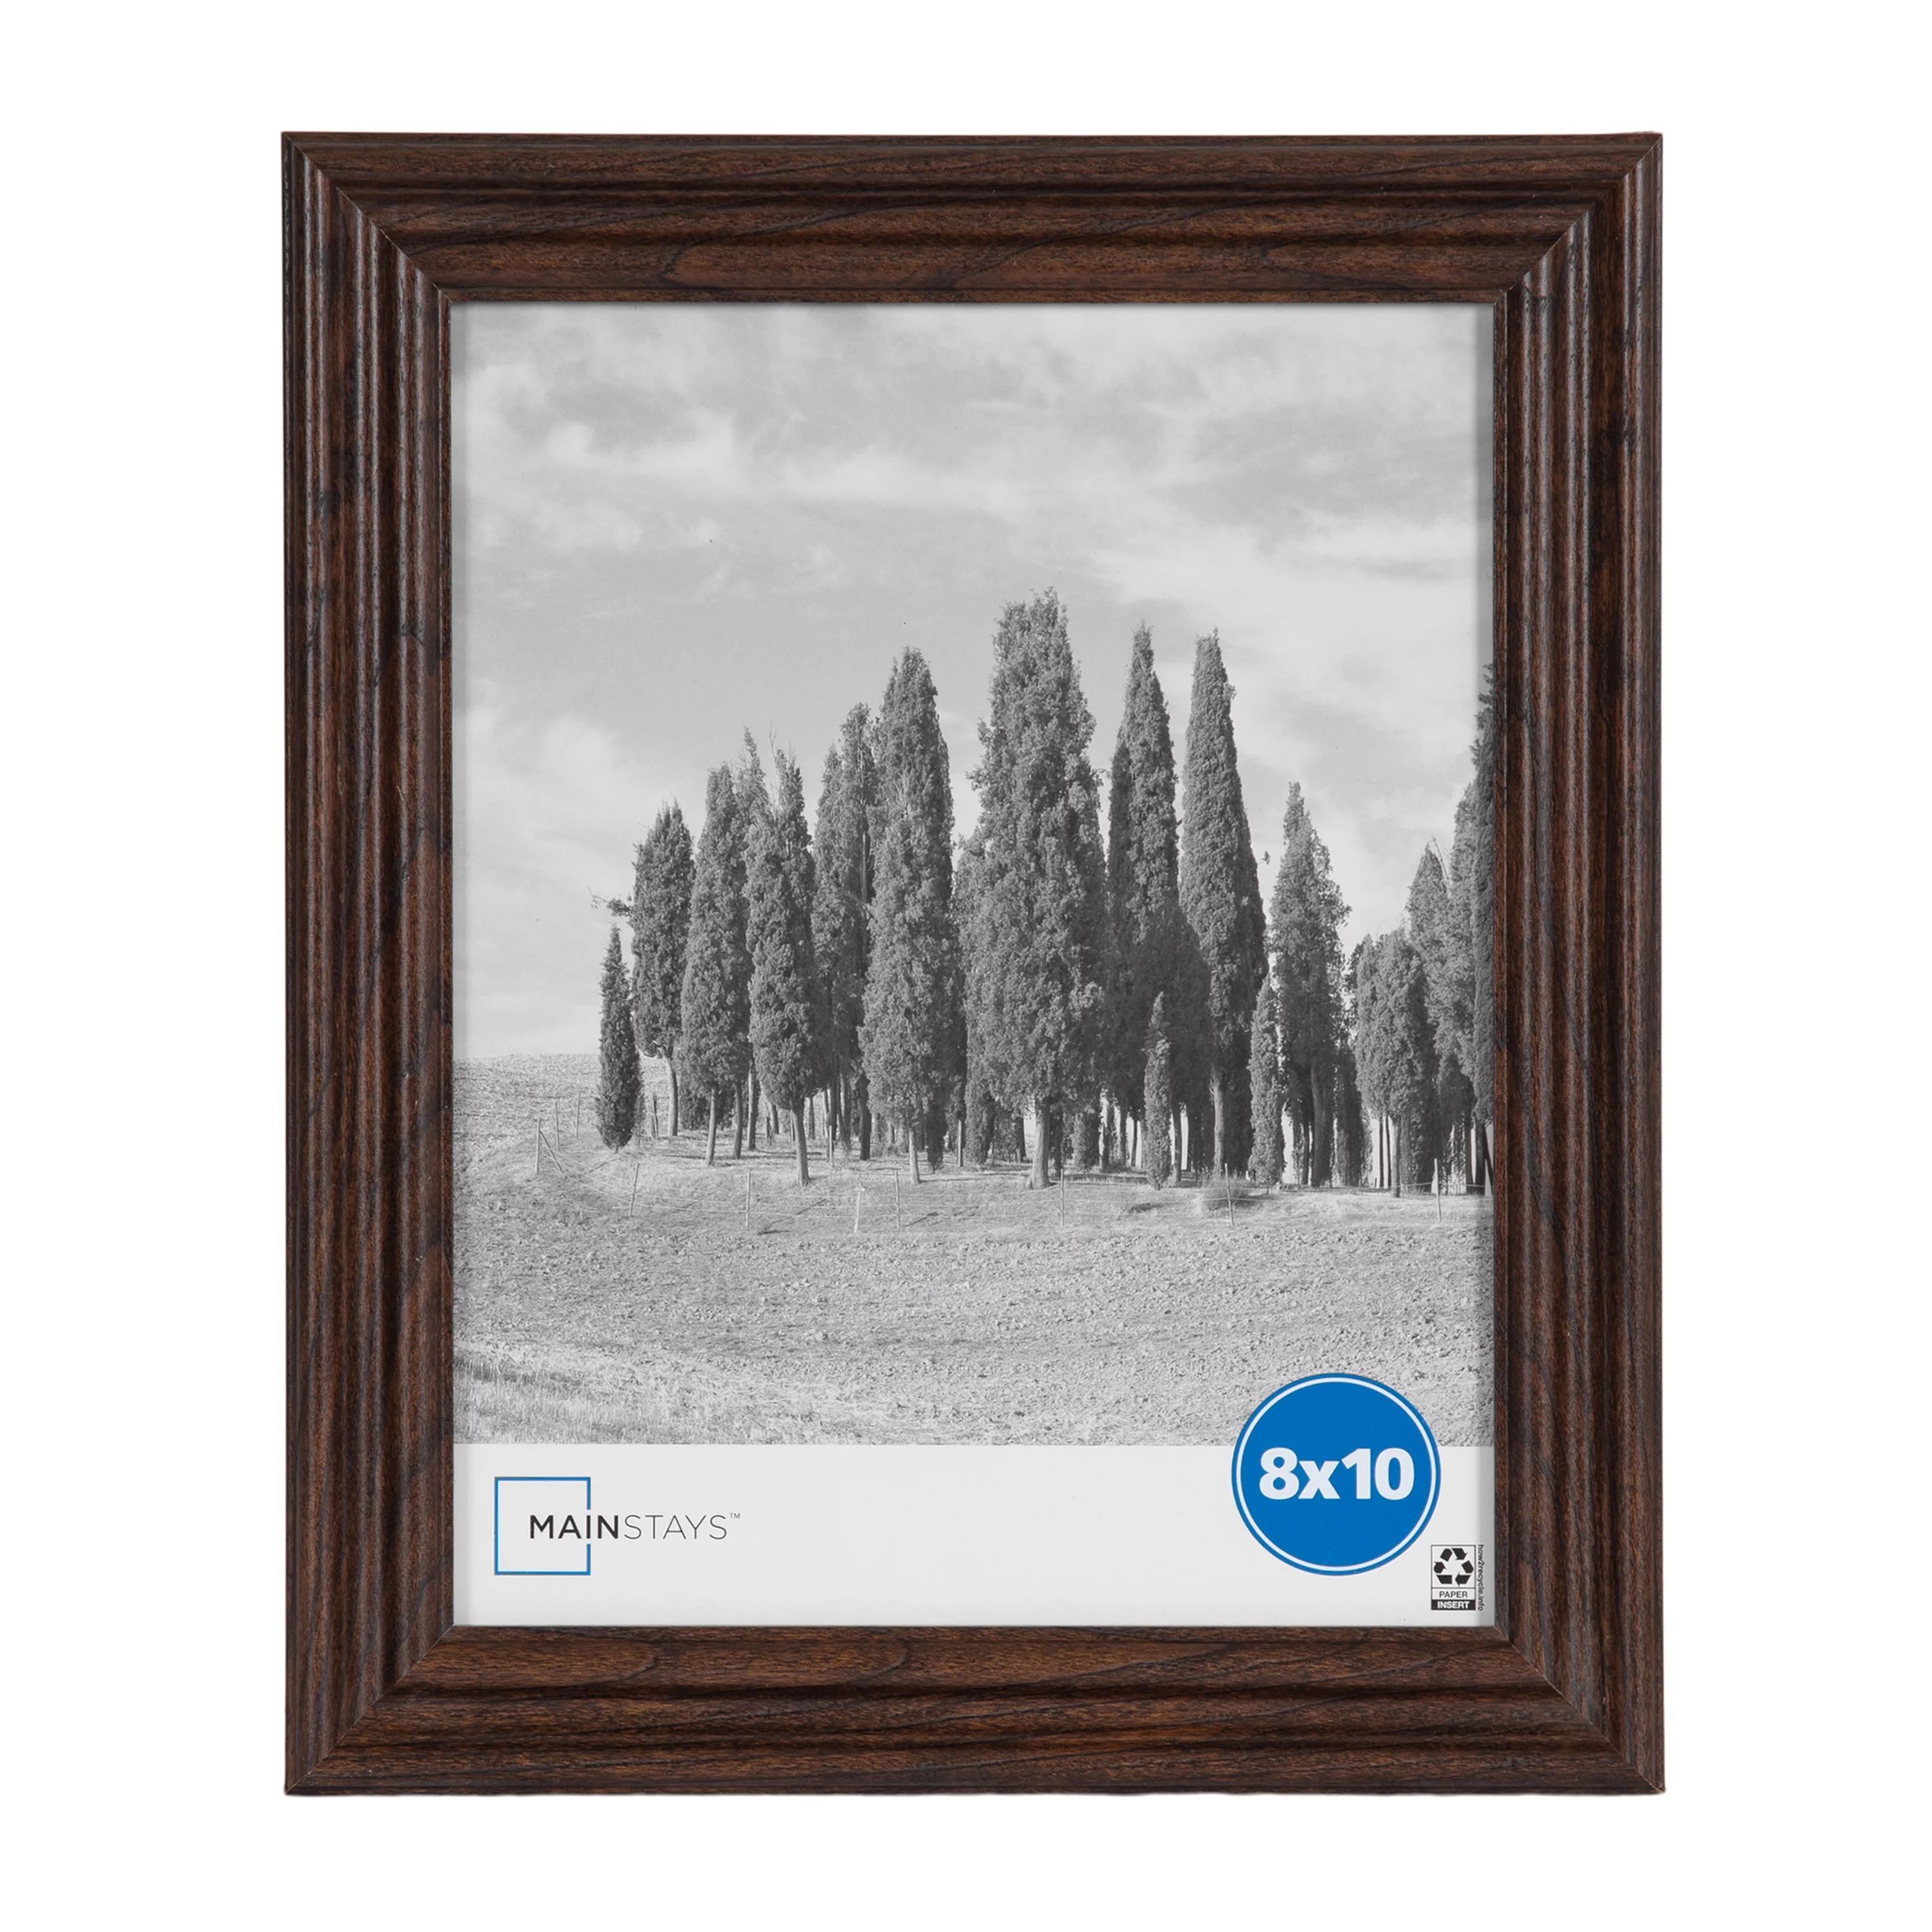 Mainstays 8x10 Traditional Gallery Wall Picture Frame, Brown | Walmart (US)